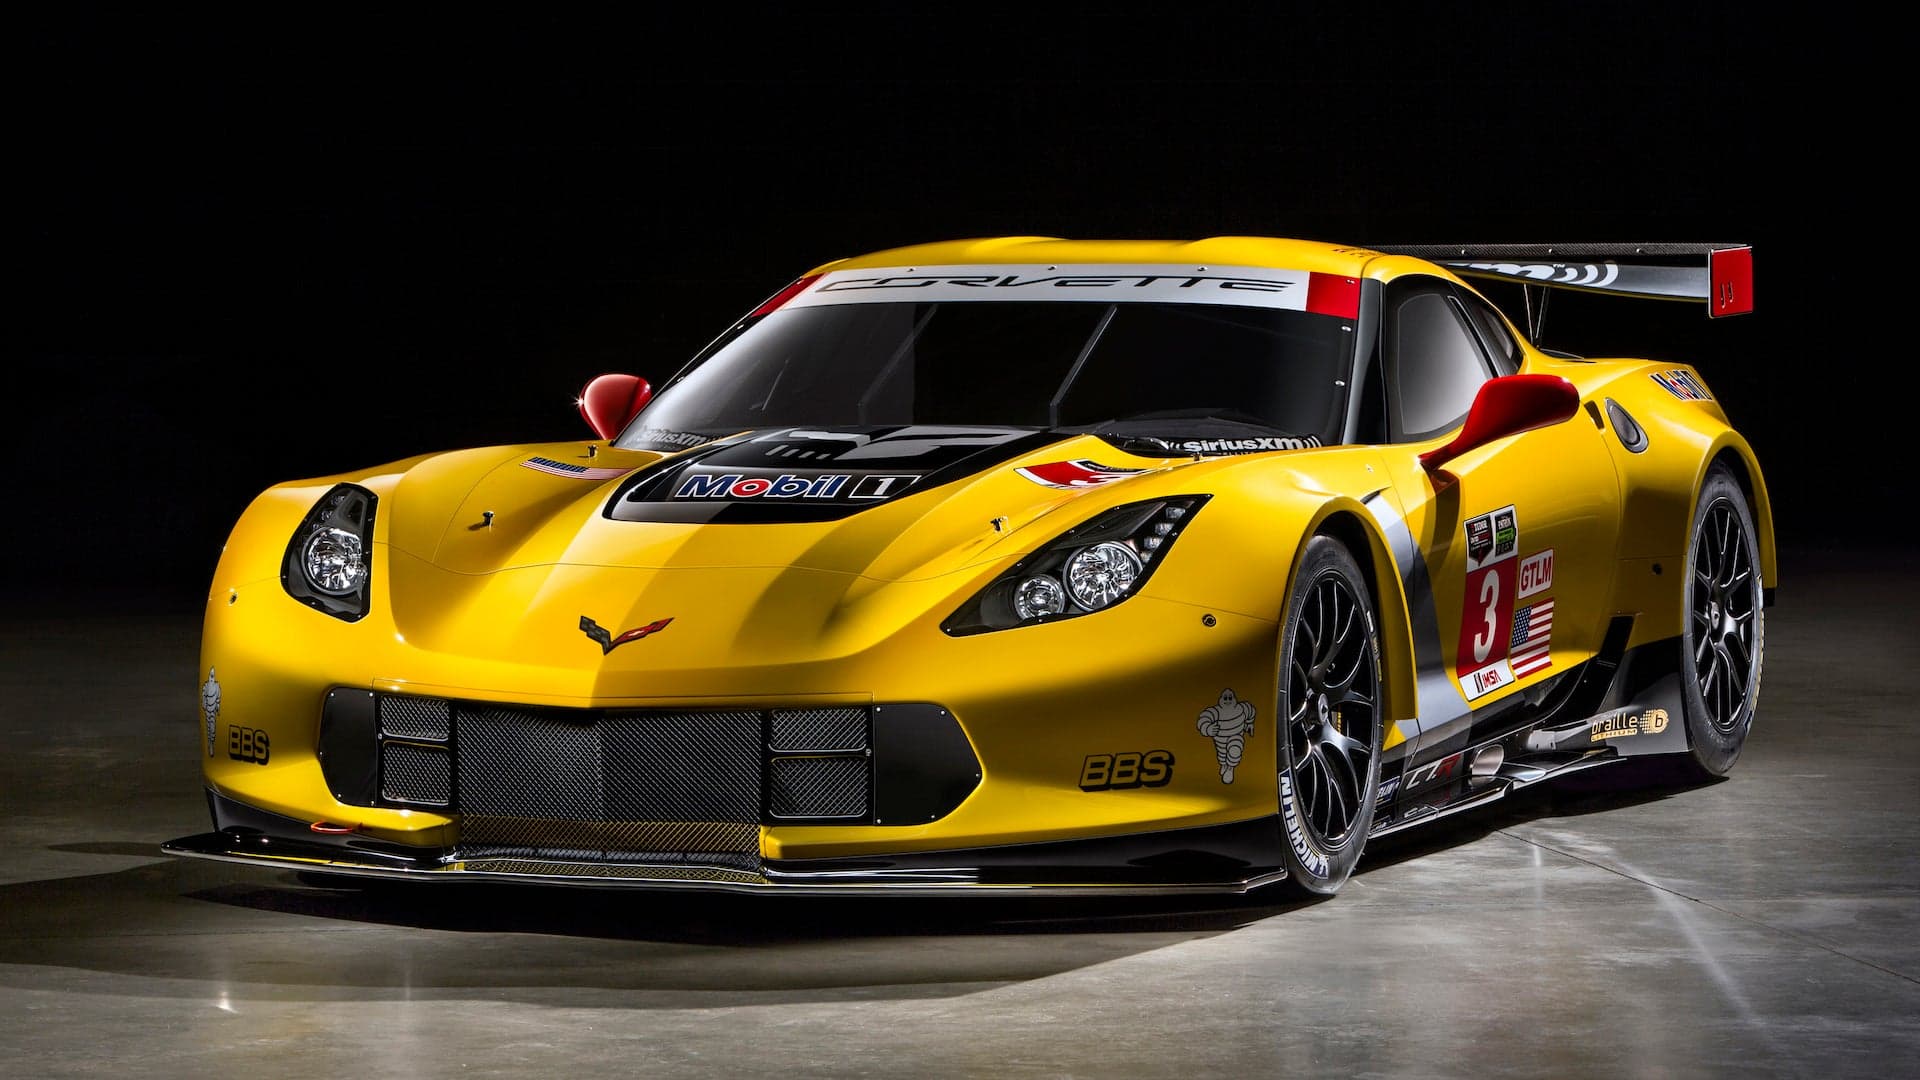 Chevrolet Corvette C7.R Will Retire From Sports Car Racing in 2019, Give Way to New C8.R: Report